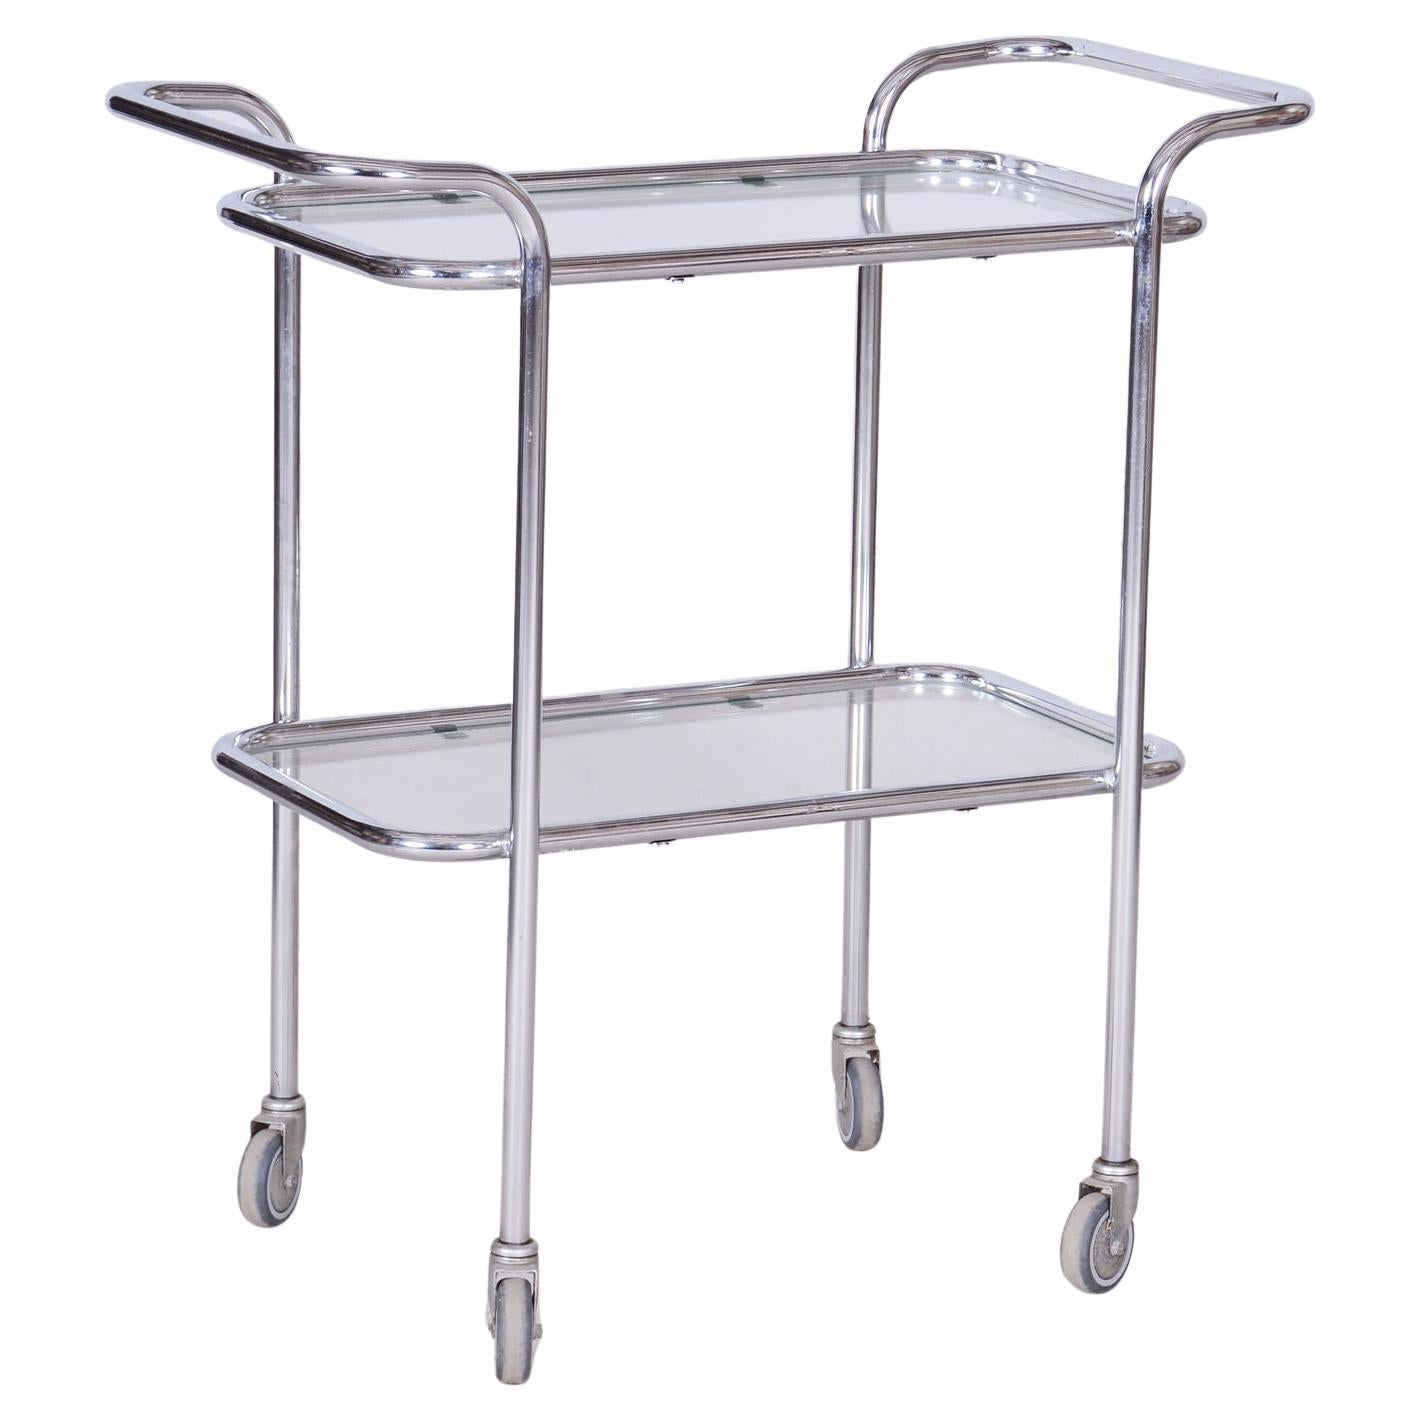 Original Bauhaus Trolley, Chrome-Plated Steel, Glass, Germany, 1940s For Sale